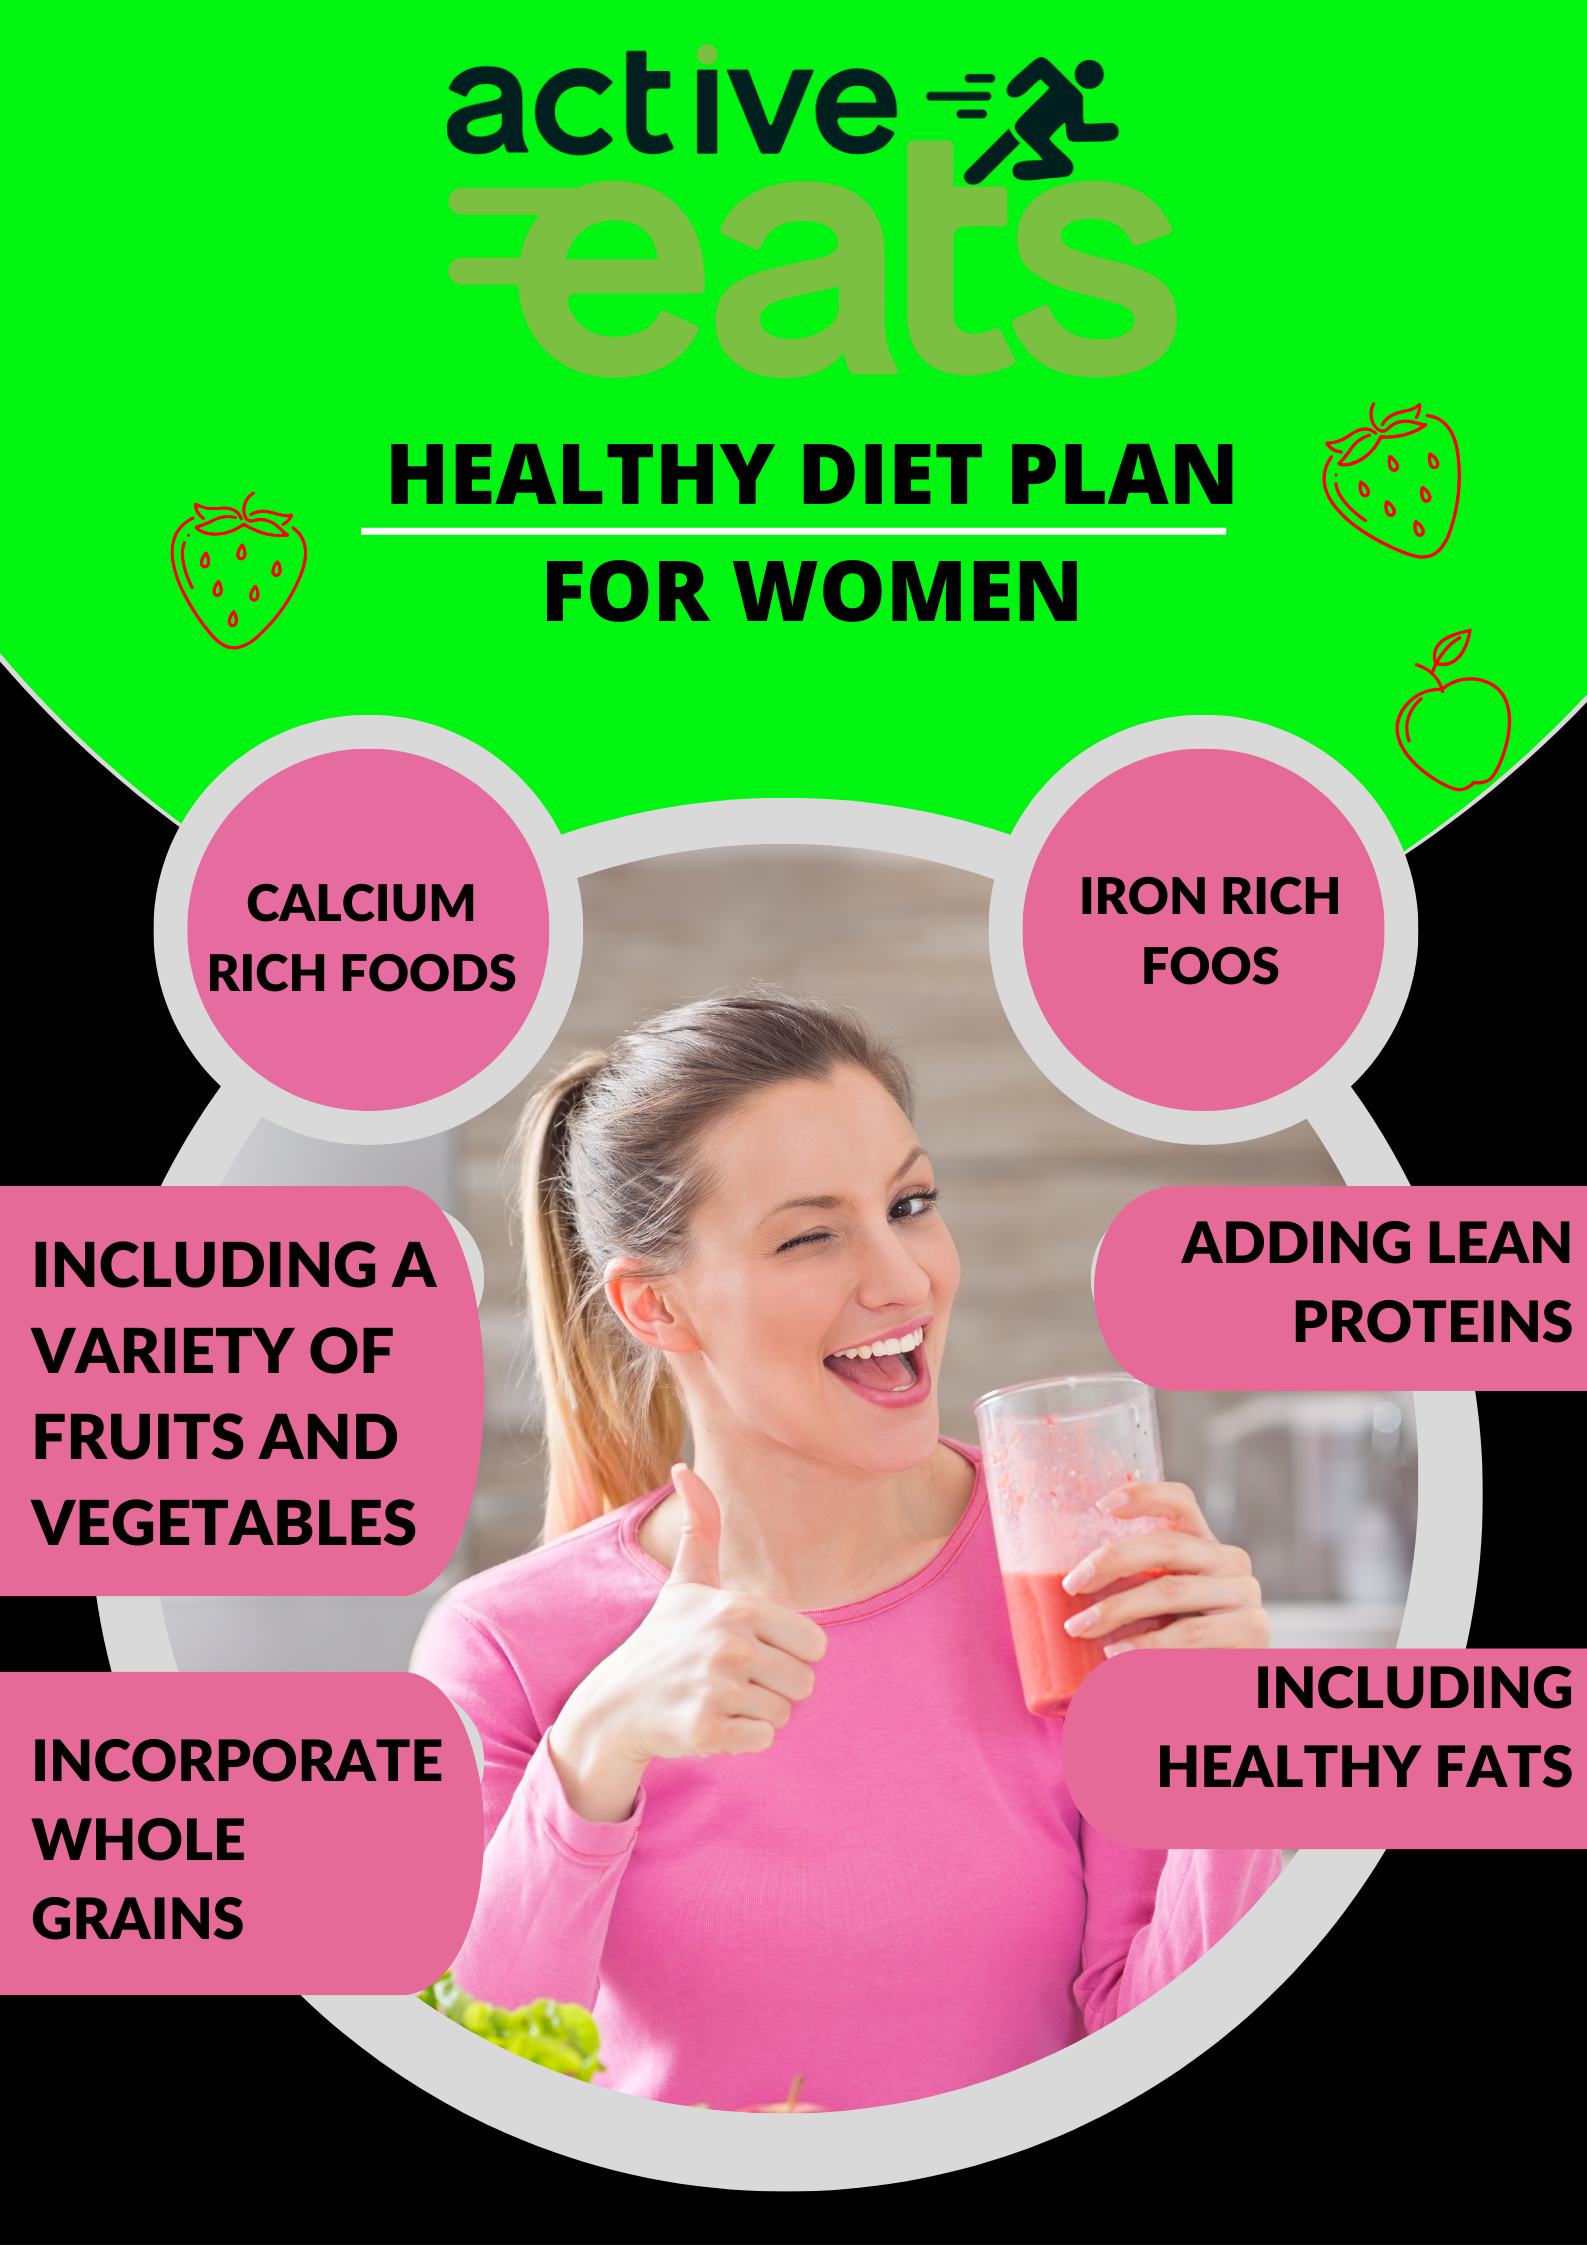 or a healthy diet plan, women should consider these tips: Balanced Meals: Include a variety of foods from all food groups. Aim for lean proteins, whole grains, fruits, and vegetables to meet nutritional needs. Portion Control: Be mindful of portion sizes to avoid overeating. Healthy Fats: Incorporate sources like avocados, nuts, and olive oil for heart health. Protein Sources: Choose lean meats, fish, beans, and tofu for muscle maintenance. Hydration: Drink plenty of water and limit sugary beverages. Fiber-Rich Foods: Include whole grains, legumes, and fibrous vegetables to aid digestion. Limit Processed Foods: Reduce intake of high-sugar, high-sodium, and highly processed items. Regular Exercise: Combine a balanced diet with physical activity for overall health and weight management. Calcium and Iron: Pay attention to these minerals for bone and blood health. Mindful Eating: Listen to your body's hunger and fullness cues.